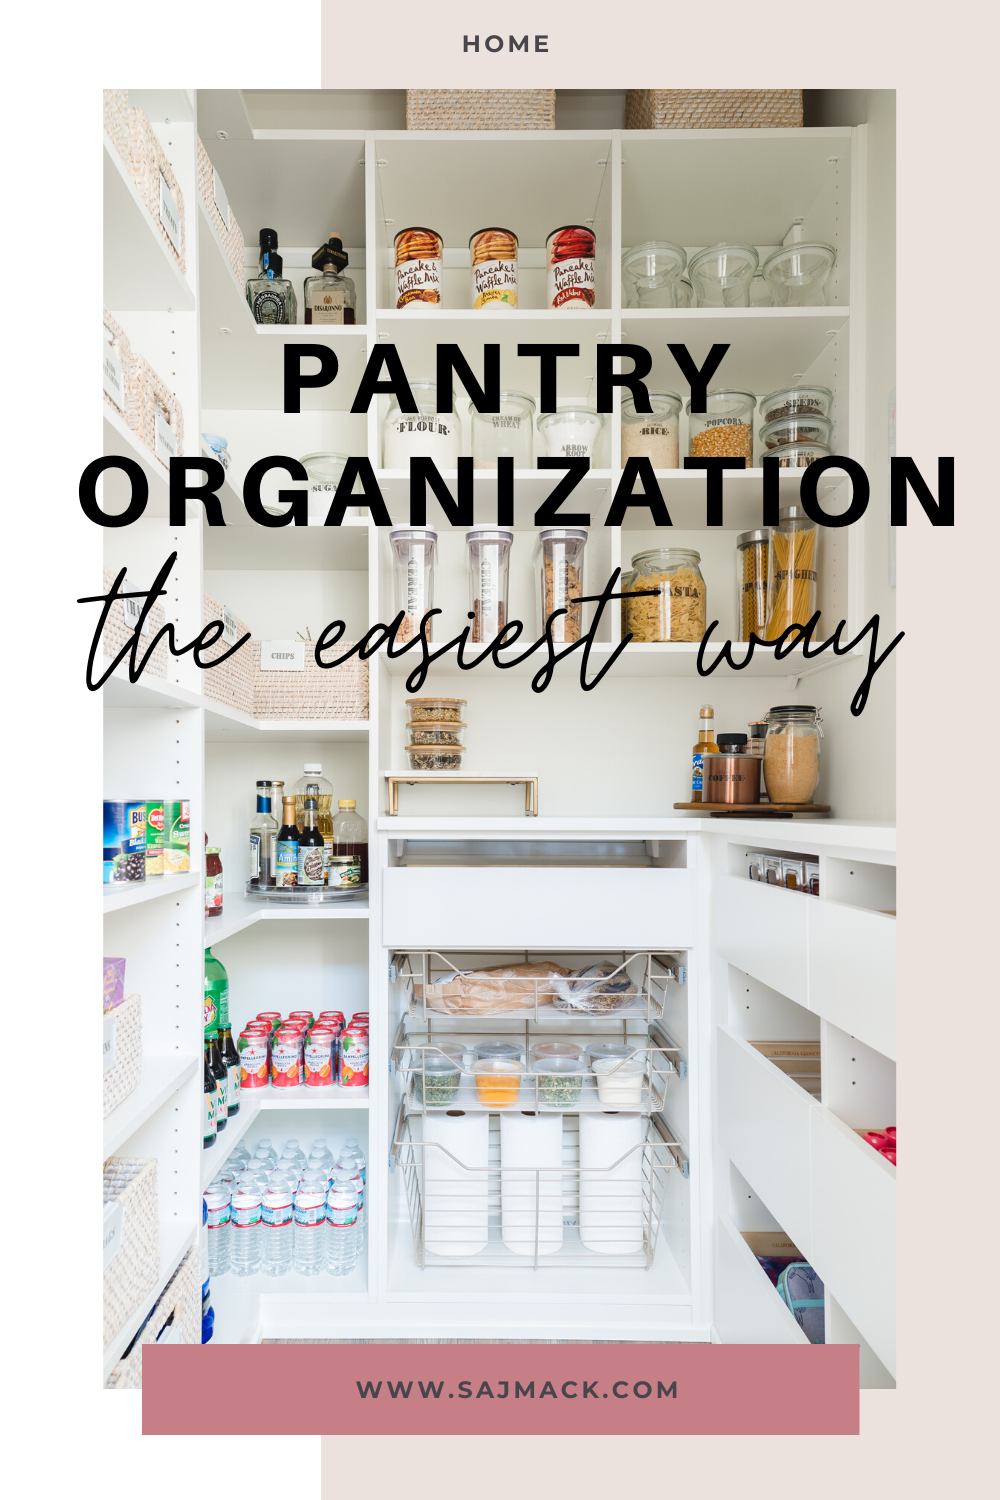 The Container Store Pantry Ideas, Atlanta lifestyle